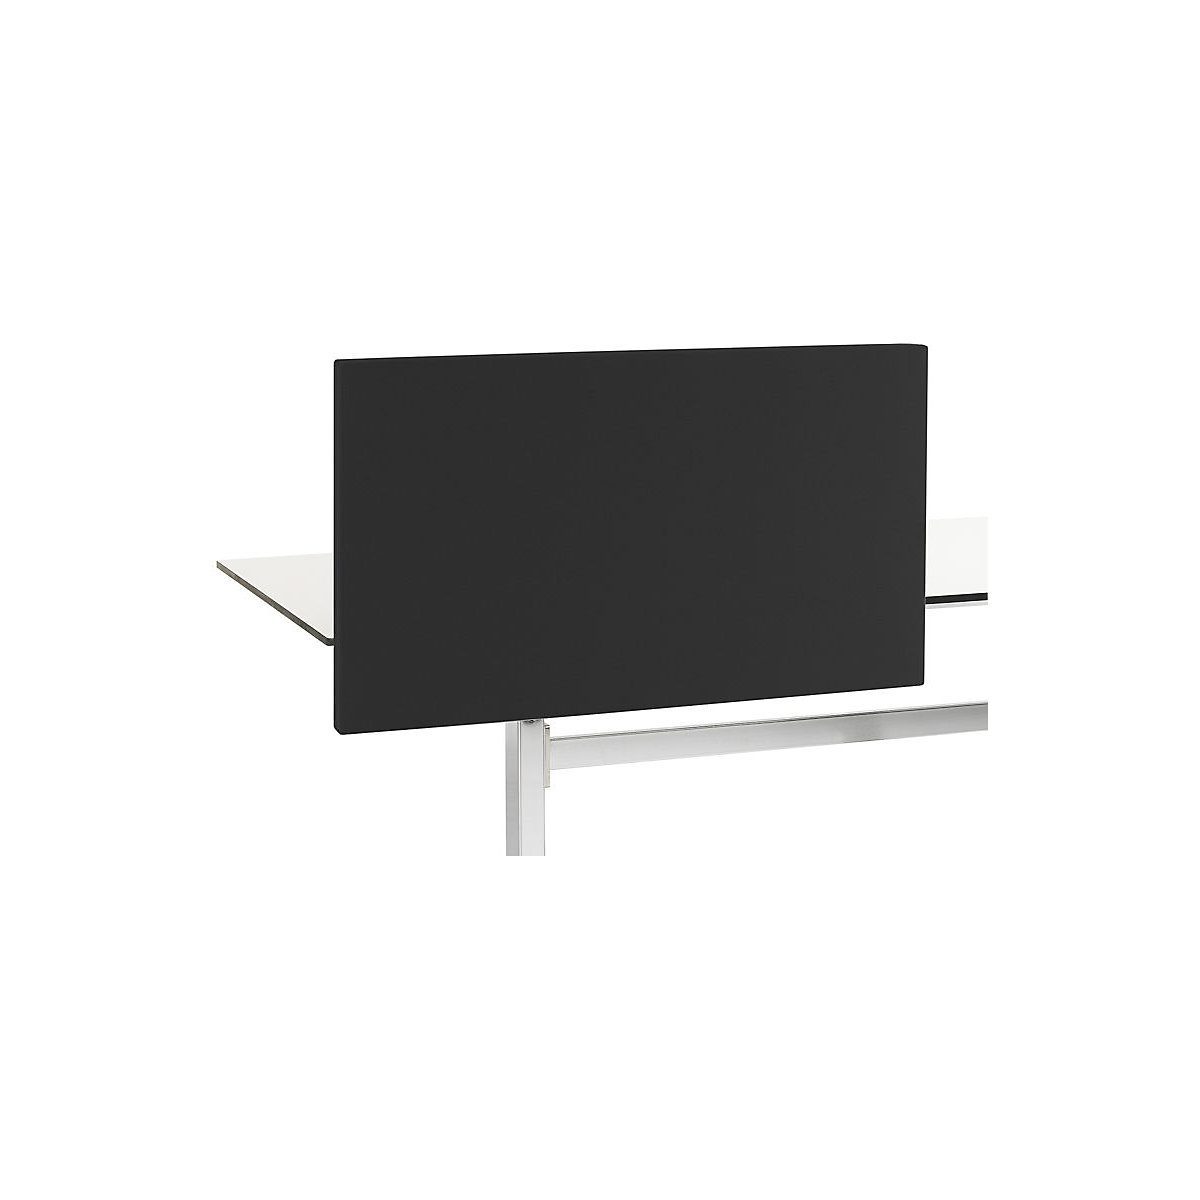 Standard acoustic desk partition with straight corners, HxW 650 x 800 mm, fabric, black-1